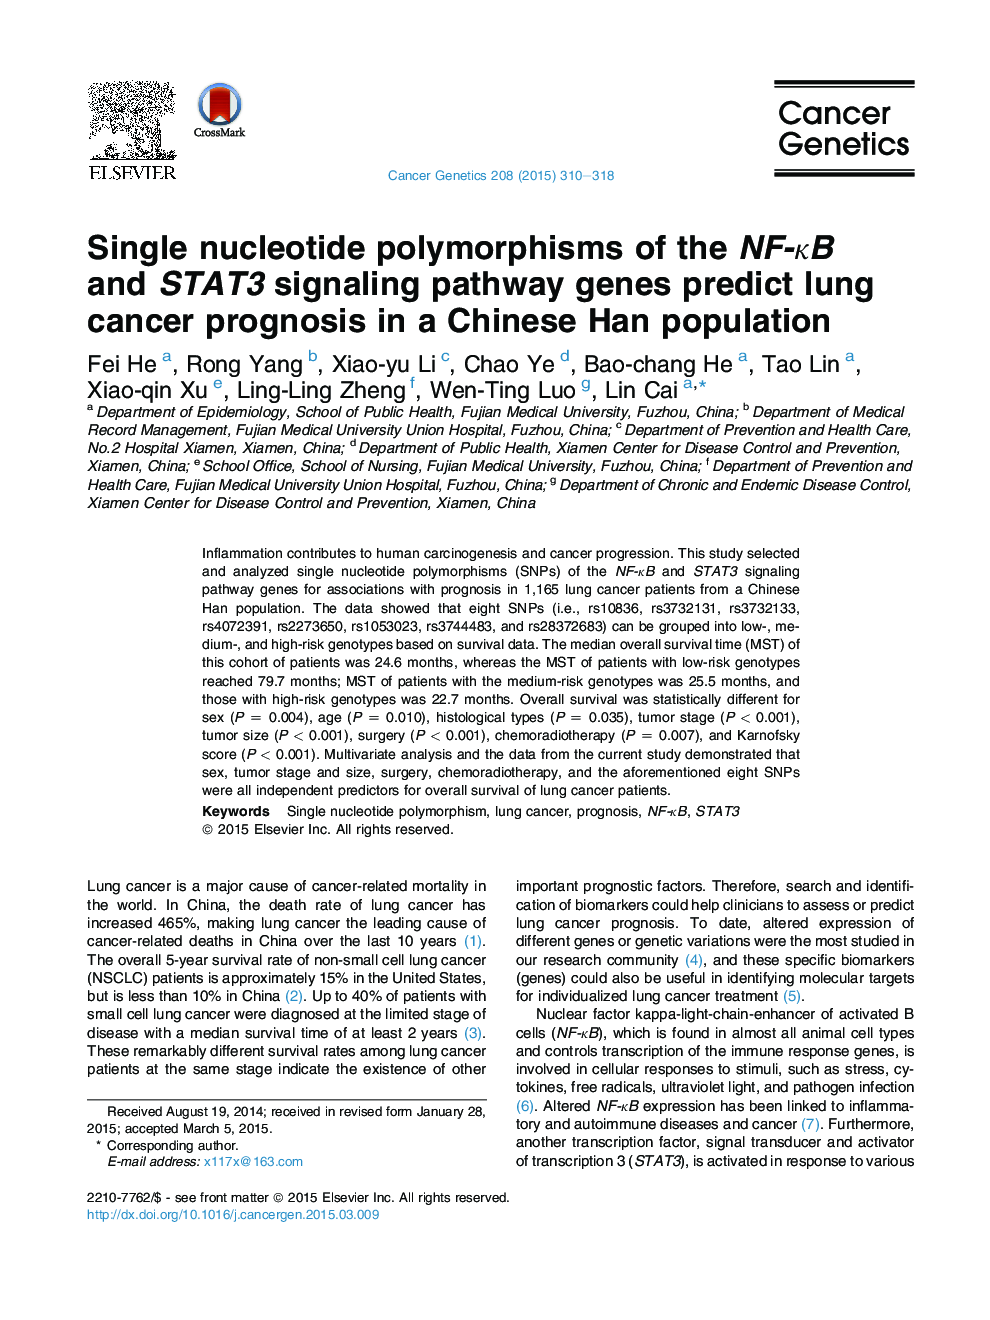 Single nucleotide polymorphisms of the NF-κB and STAT3 signaling pathway genes predict lung cancer prognosis in a Chinese Han population